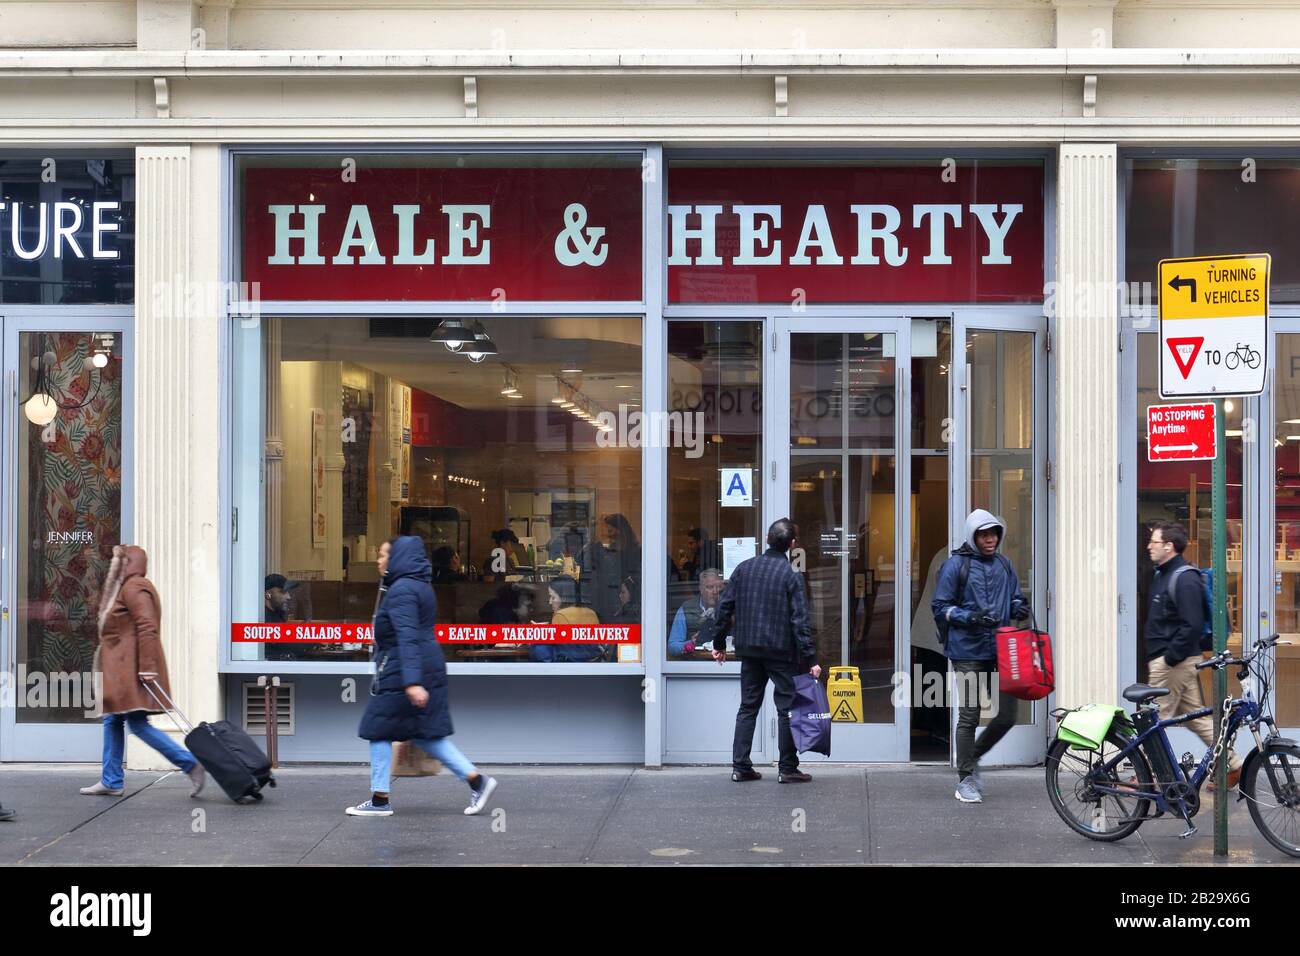 [historical storefront] Hale & Hearty, 655 6th Ave, New York, NYC storefront photo of a soup and salad shop in Manhattan's Chelsea neighborhood. Stock Photo